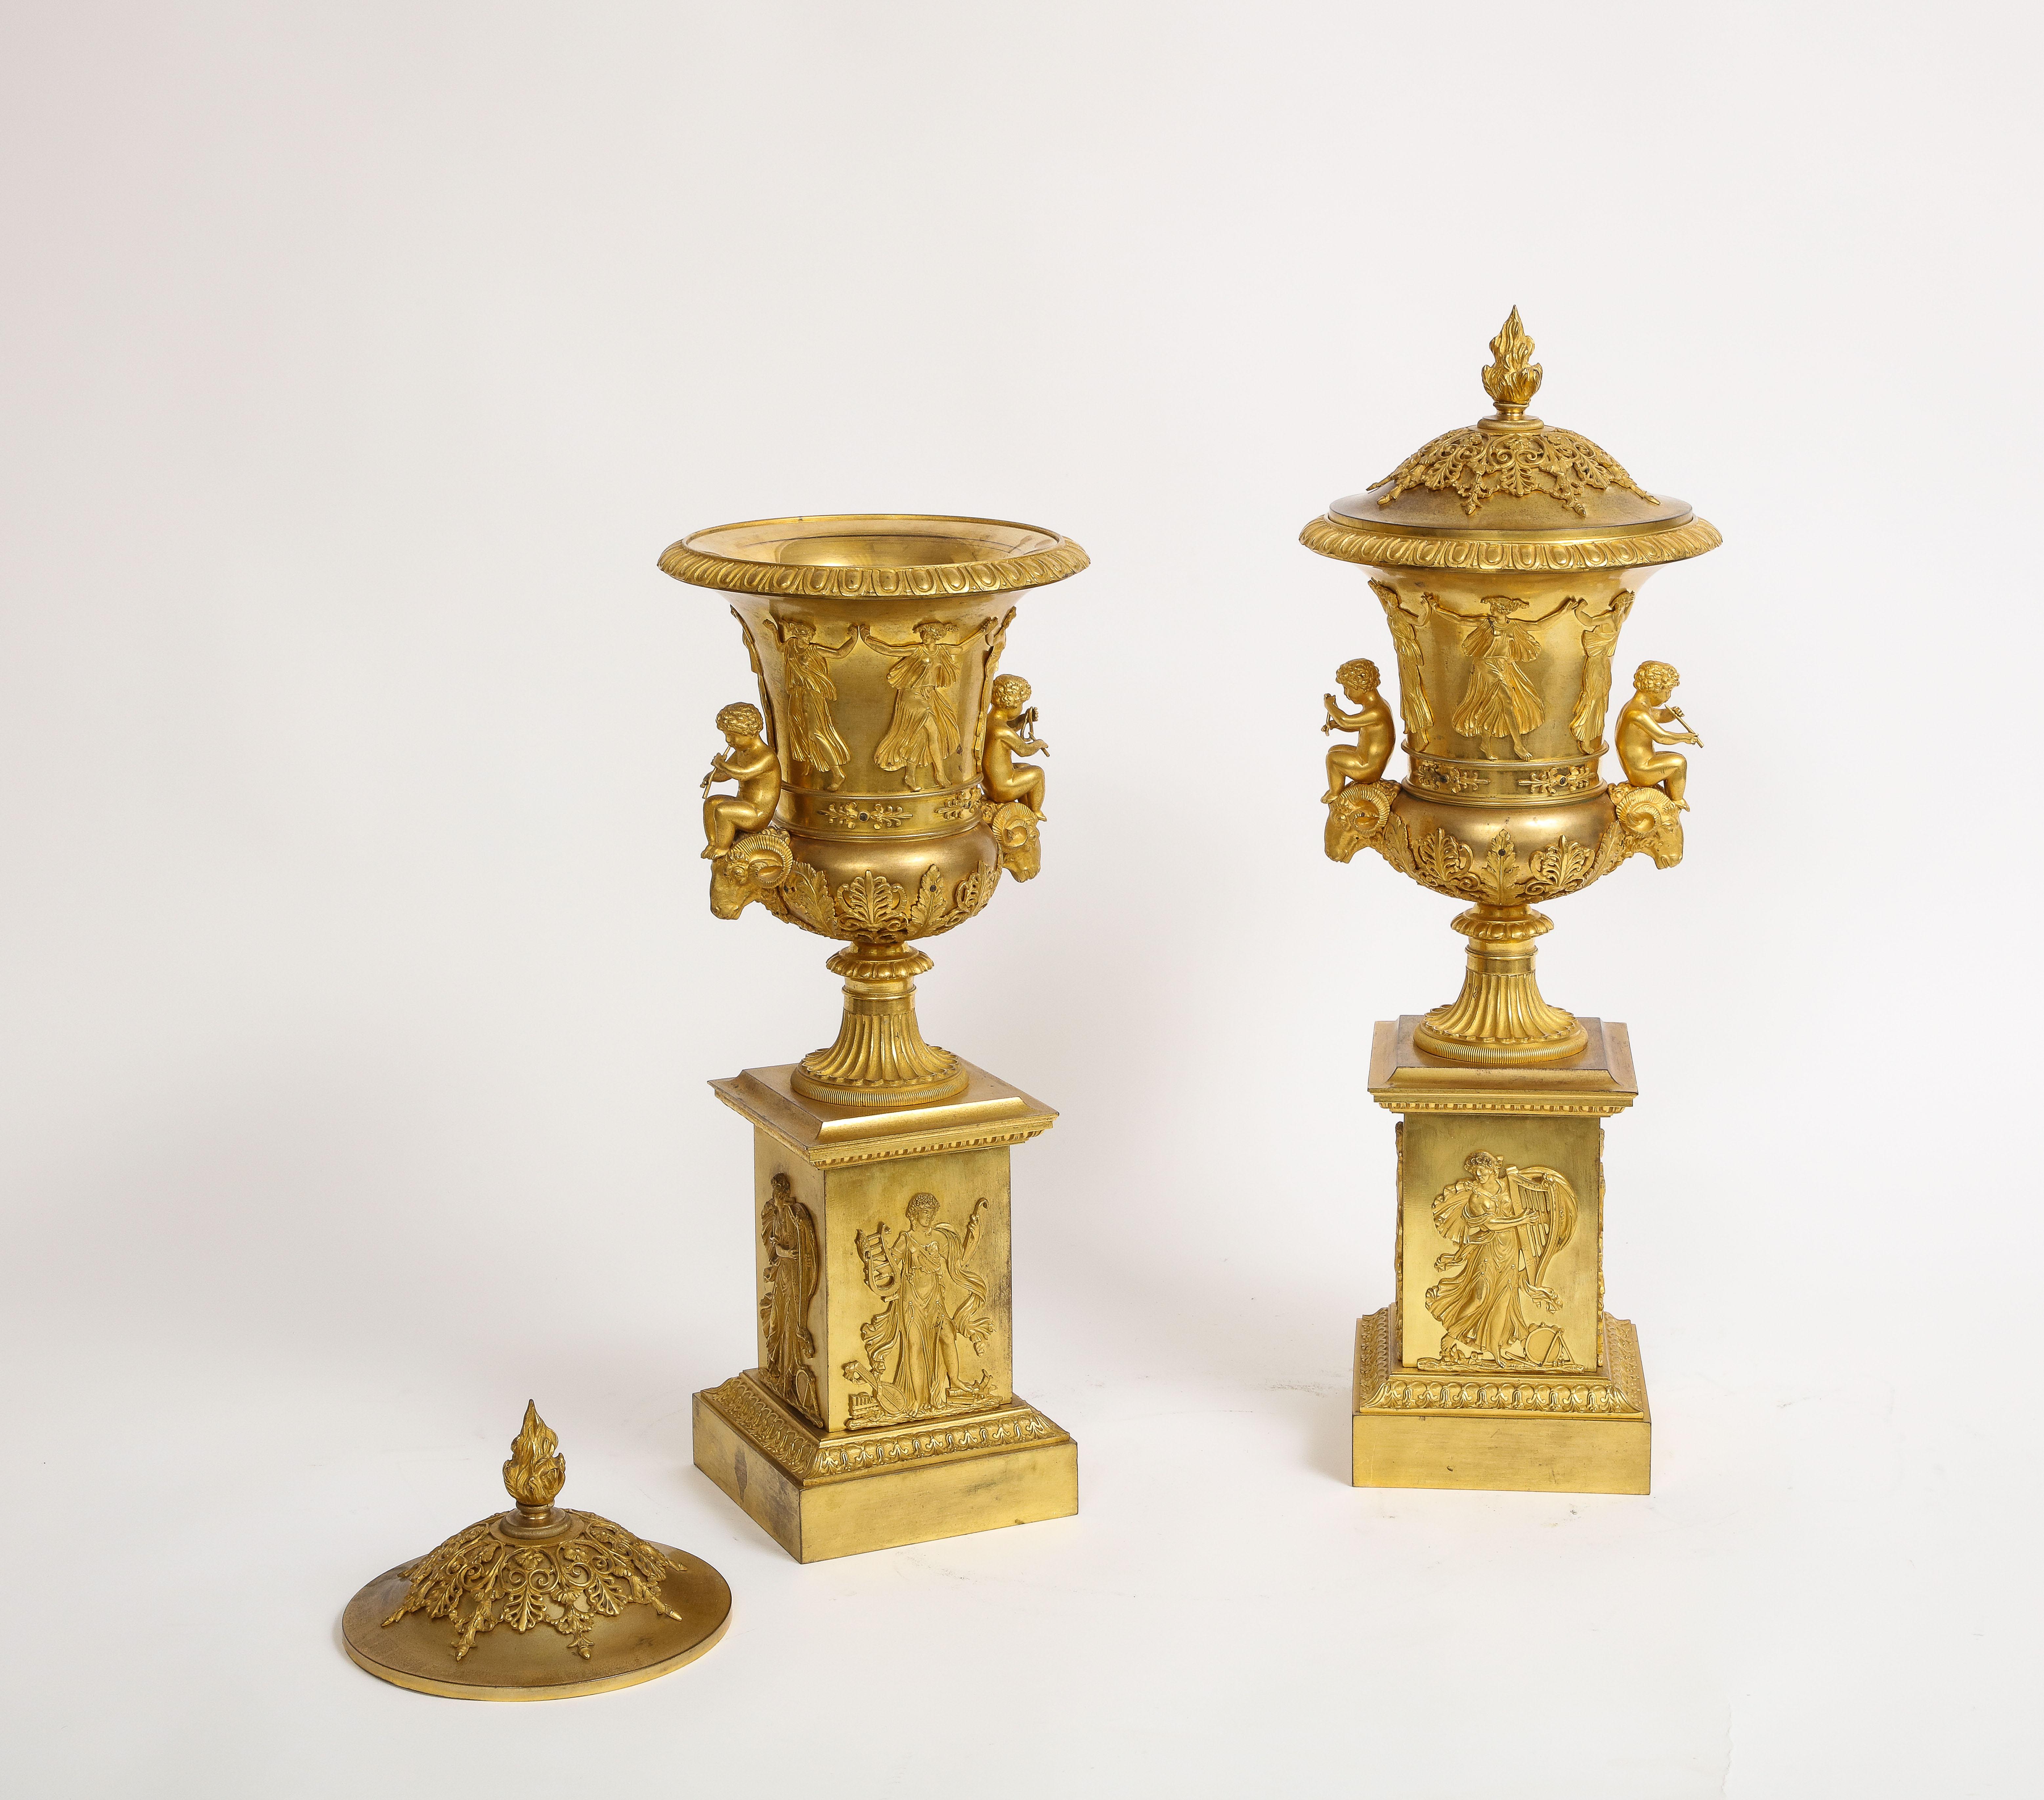 Impt Pair of French Empire Ormolu Covered vases/Potpourris, Att. Thomier A Paris In Good Condition For Sale In New York, NY